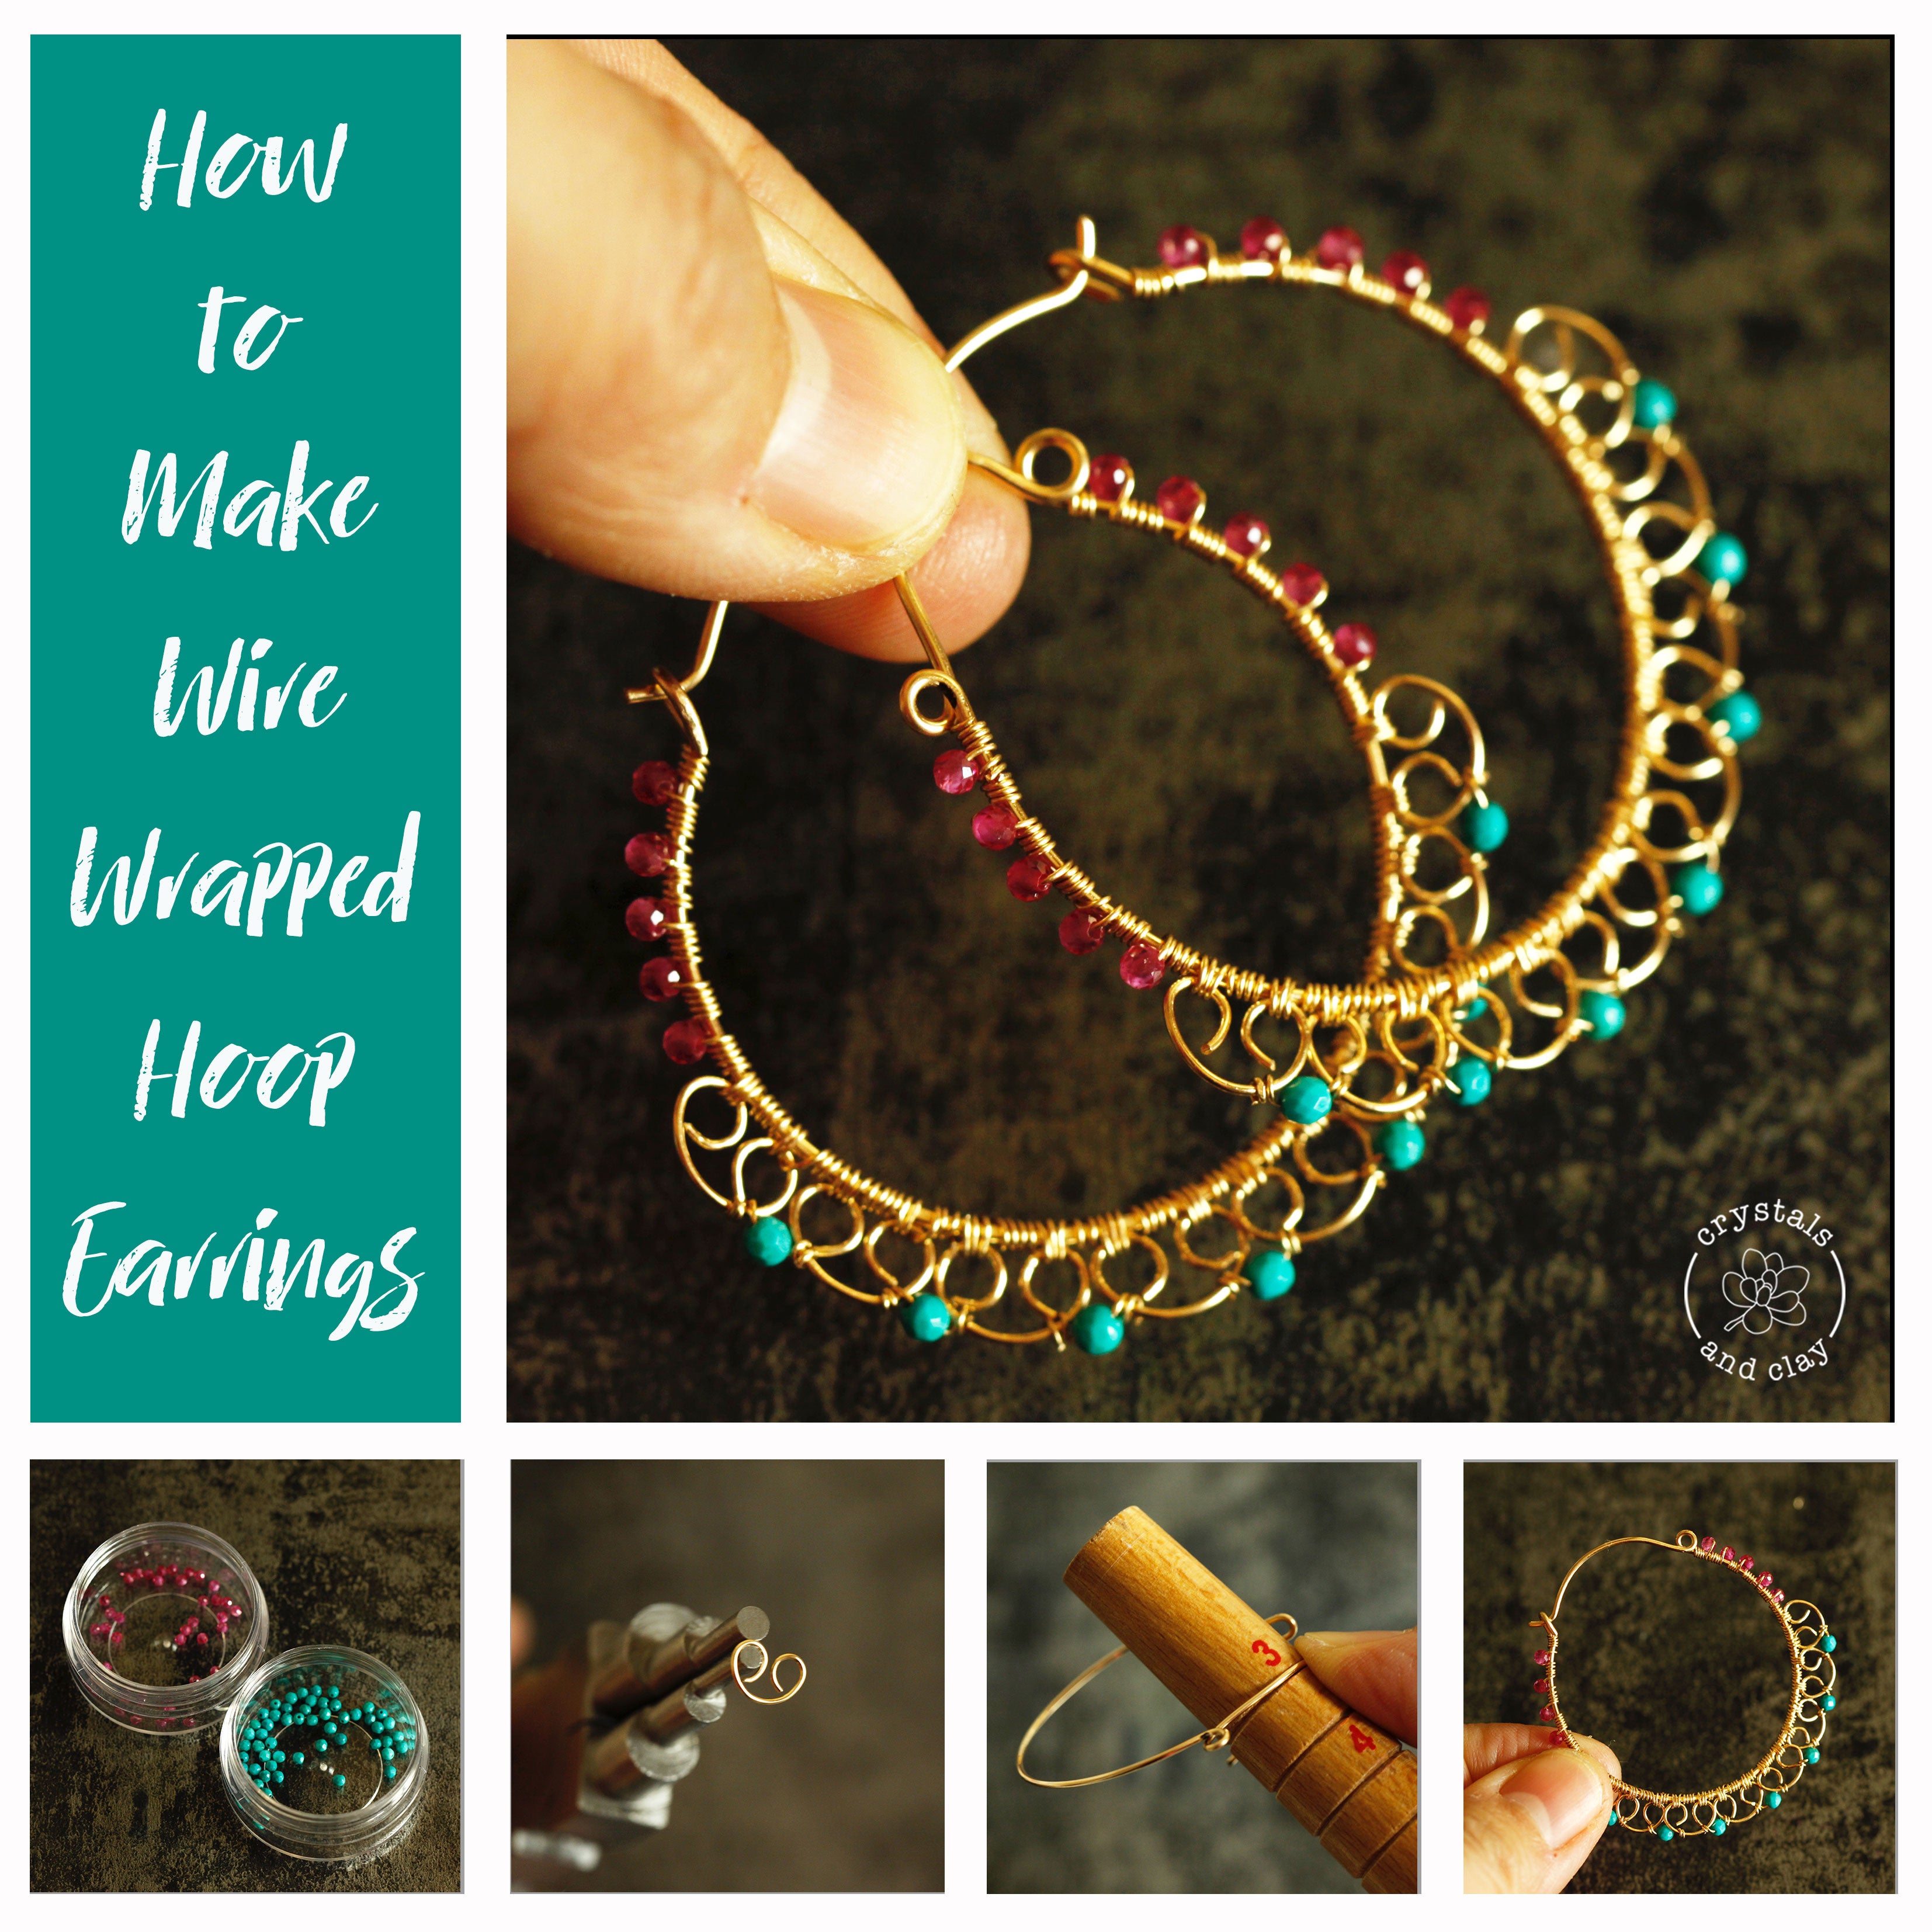 Making Simple Wire Hoops  Jewelry 101  YouTube